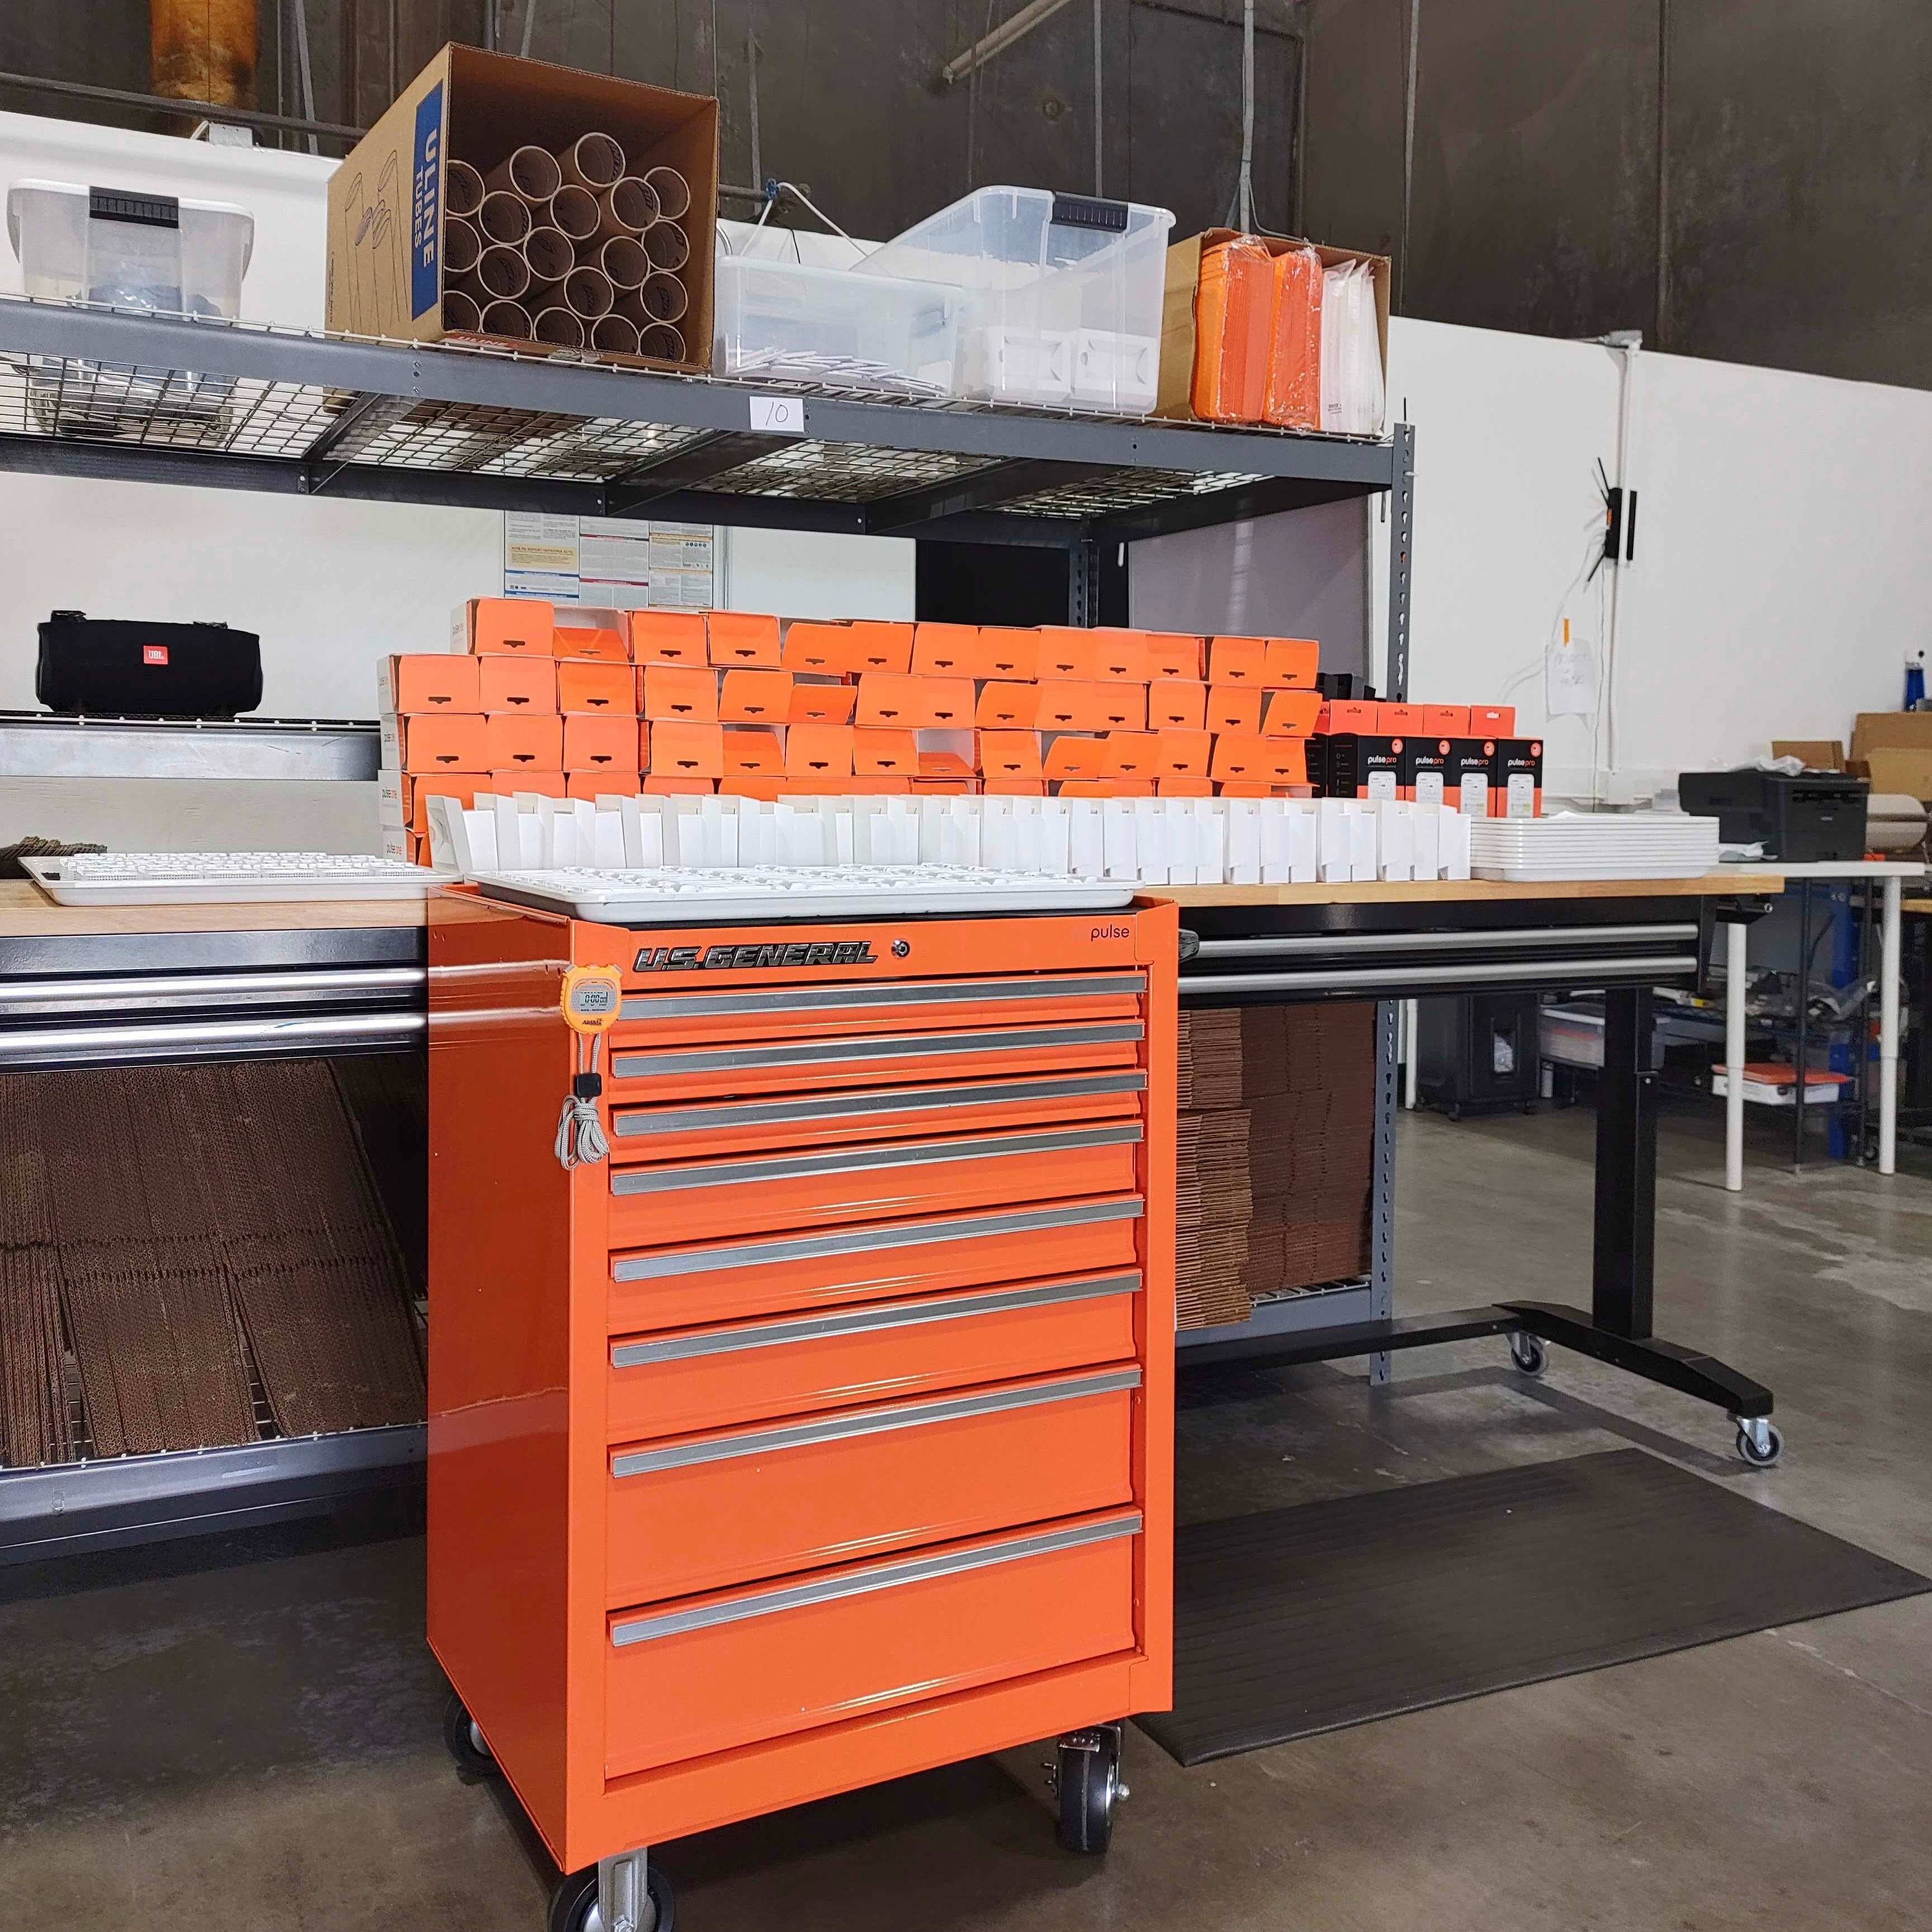 Front view of a bright orange toolbox and table with product boxes stacked up